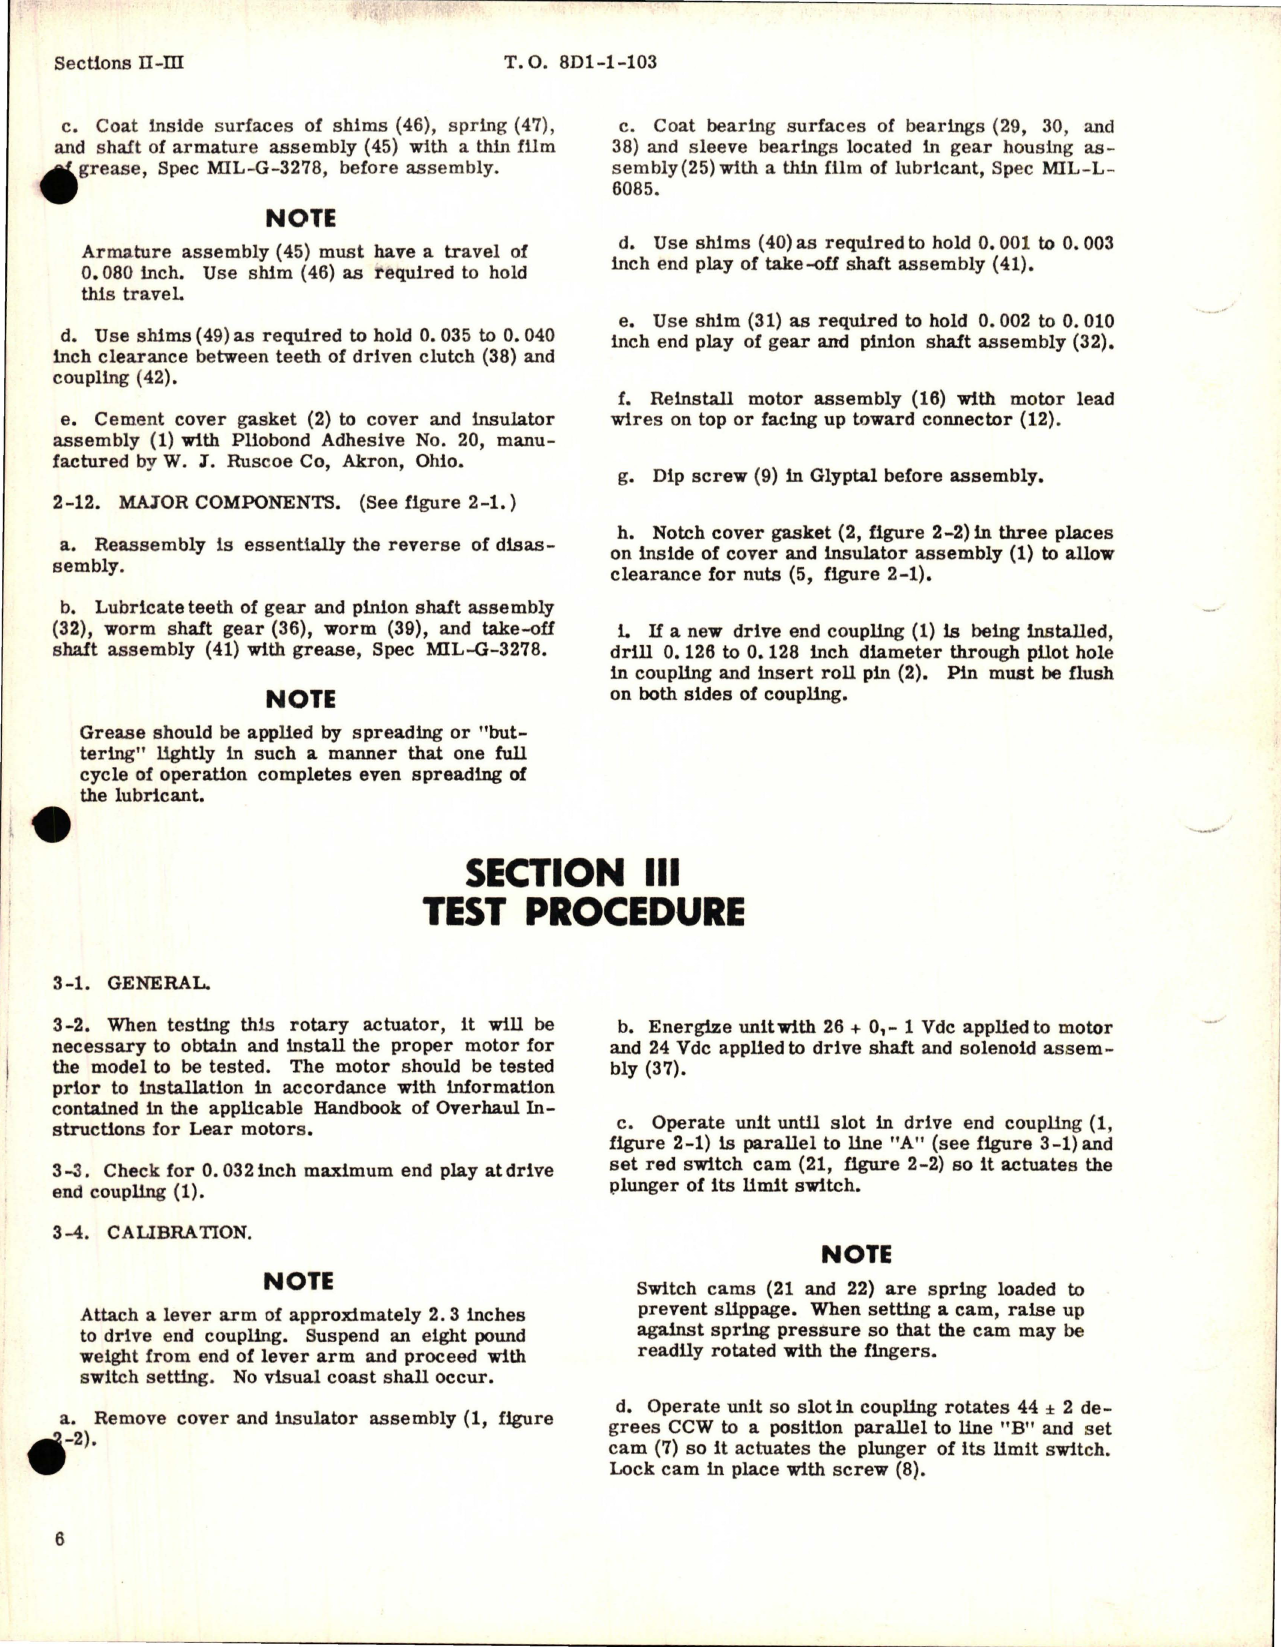 Sample page 8 from AirCorps Library document: Overhaul Instructions for Rotary Actuator 